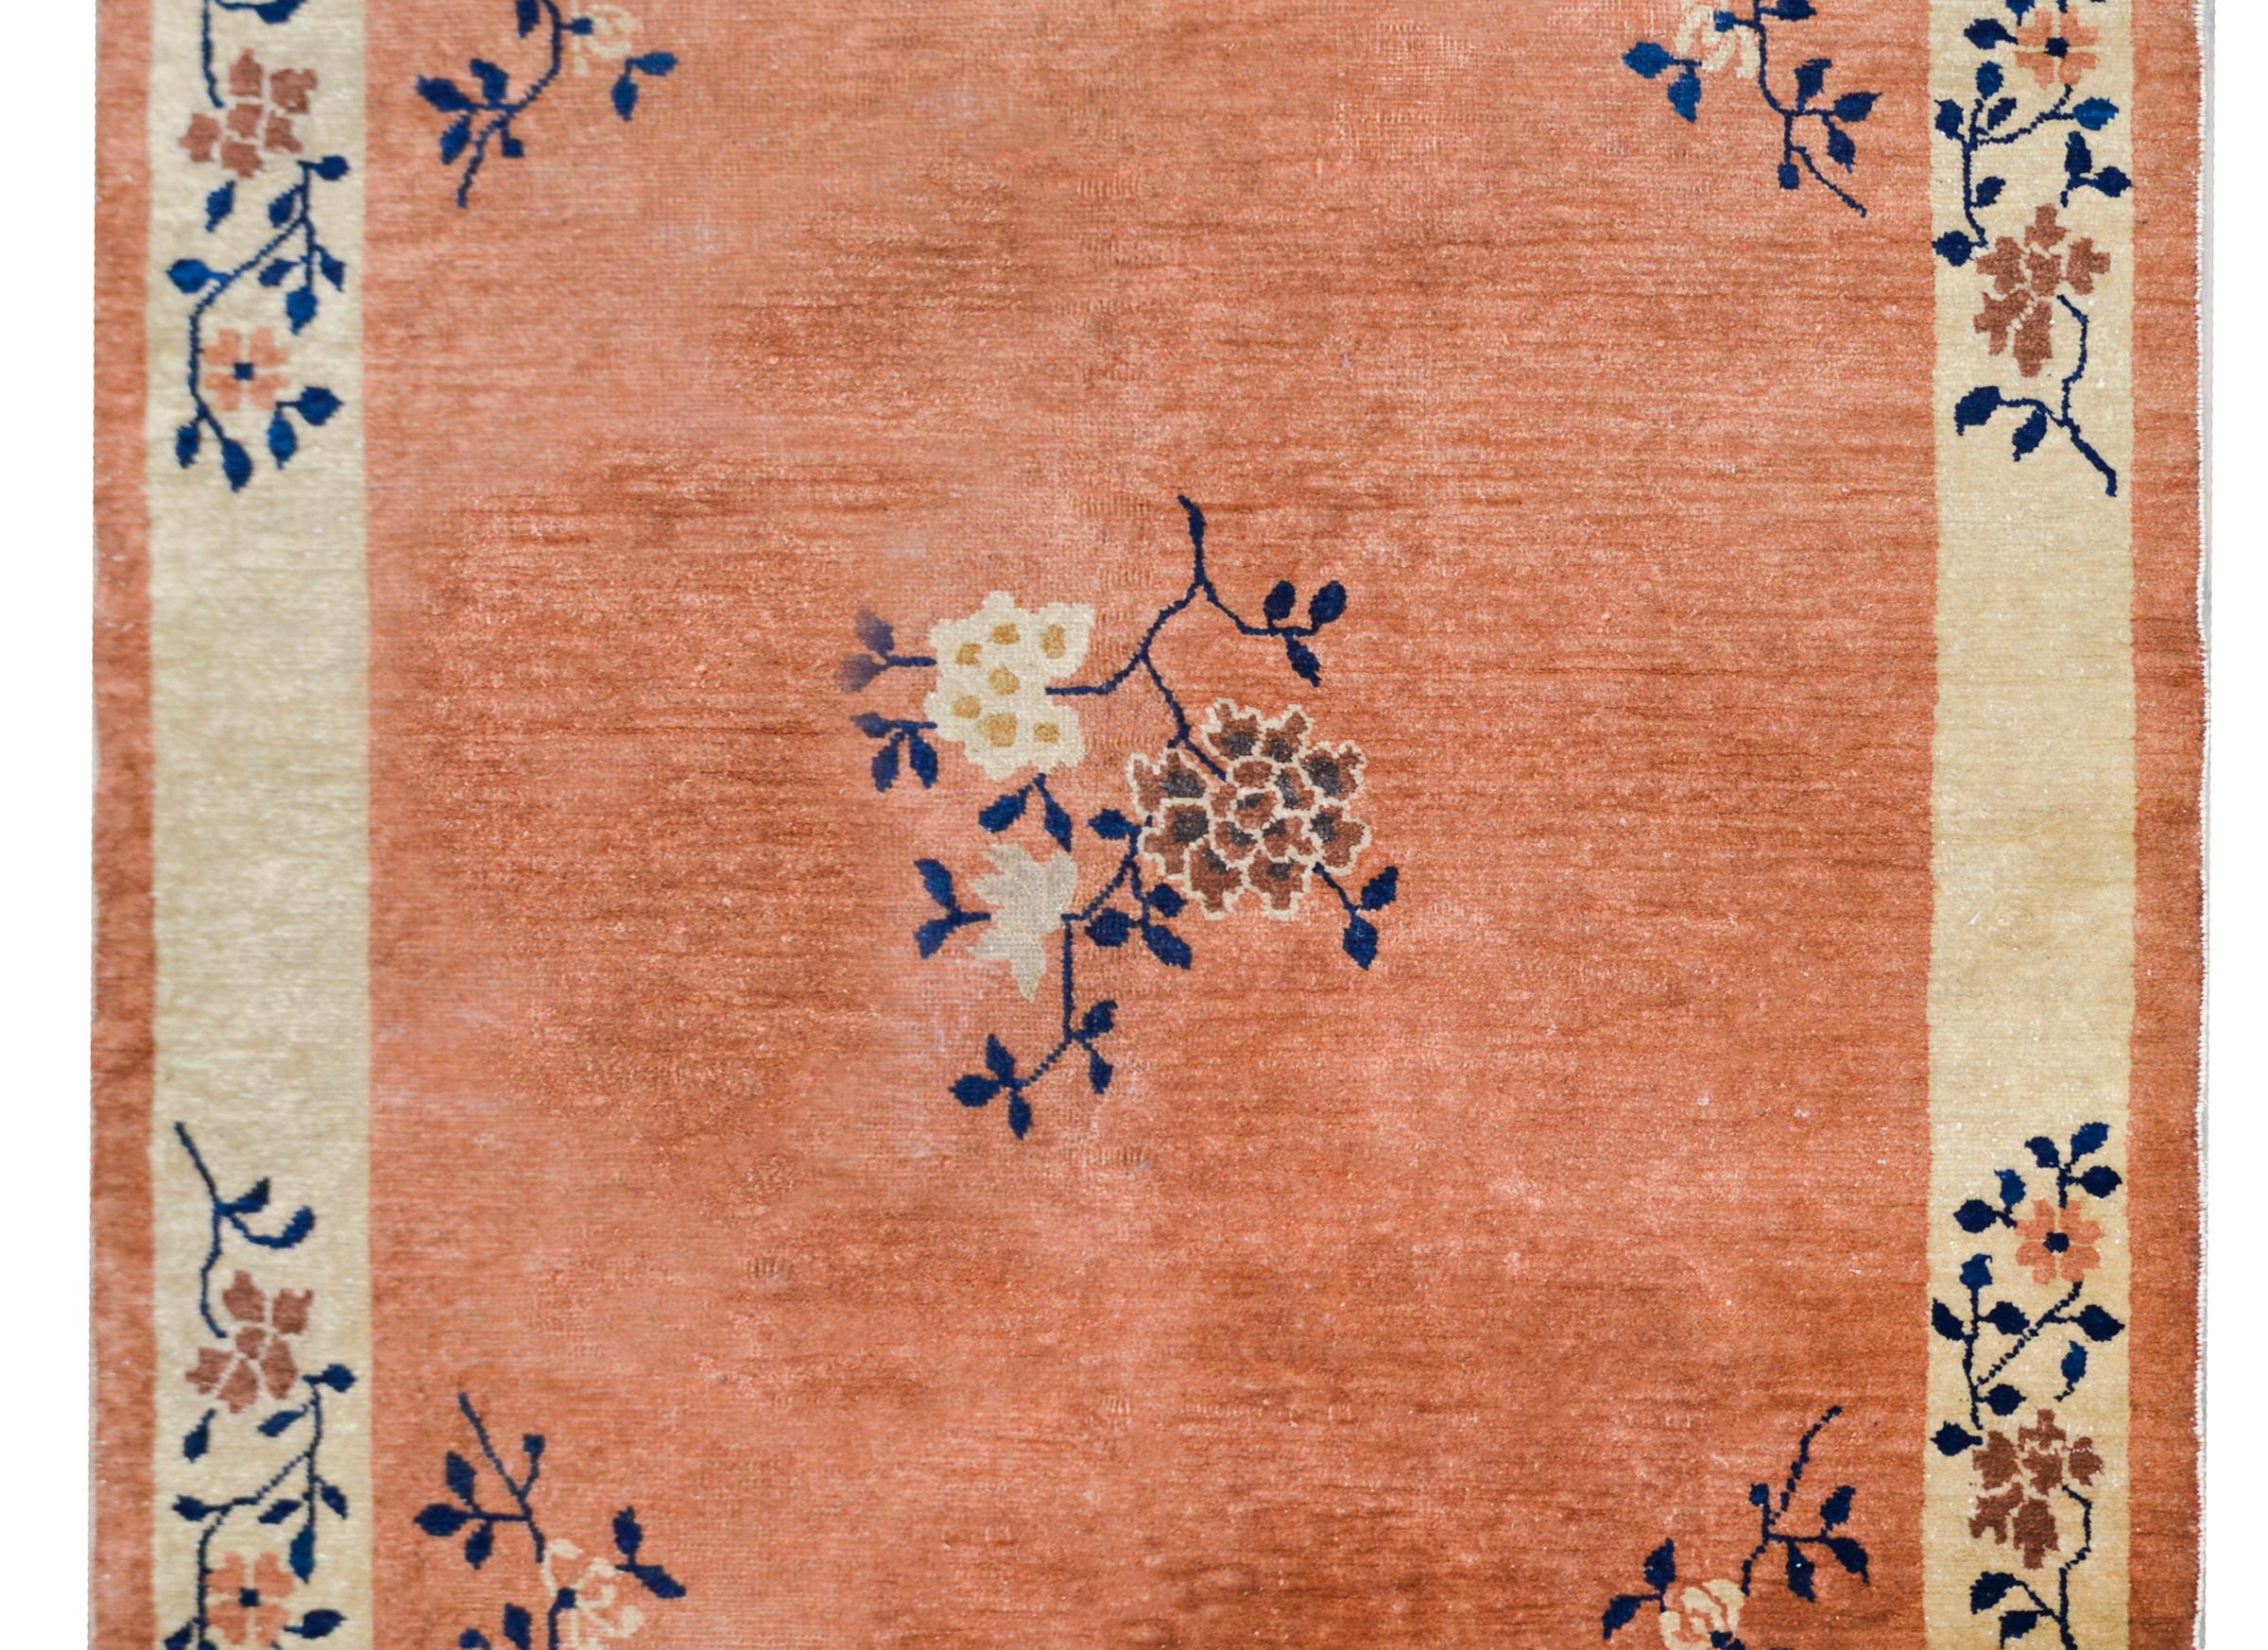 A chic early 20th century Chinese Mandarin rug with a pale orange field with a cream colored striped border with a central peony medallion with chrysanthemums in each corner, and more peonies covering the border.